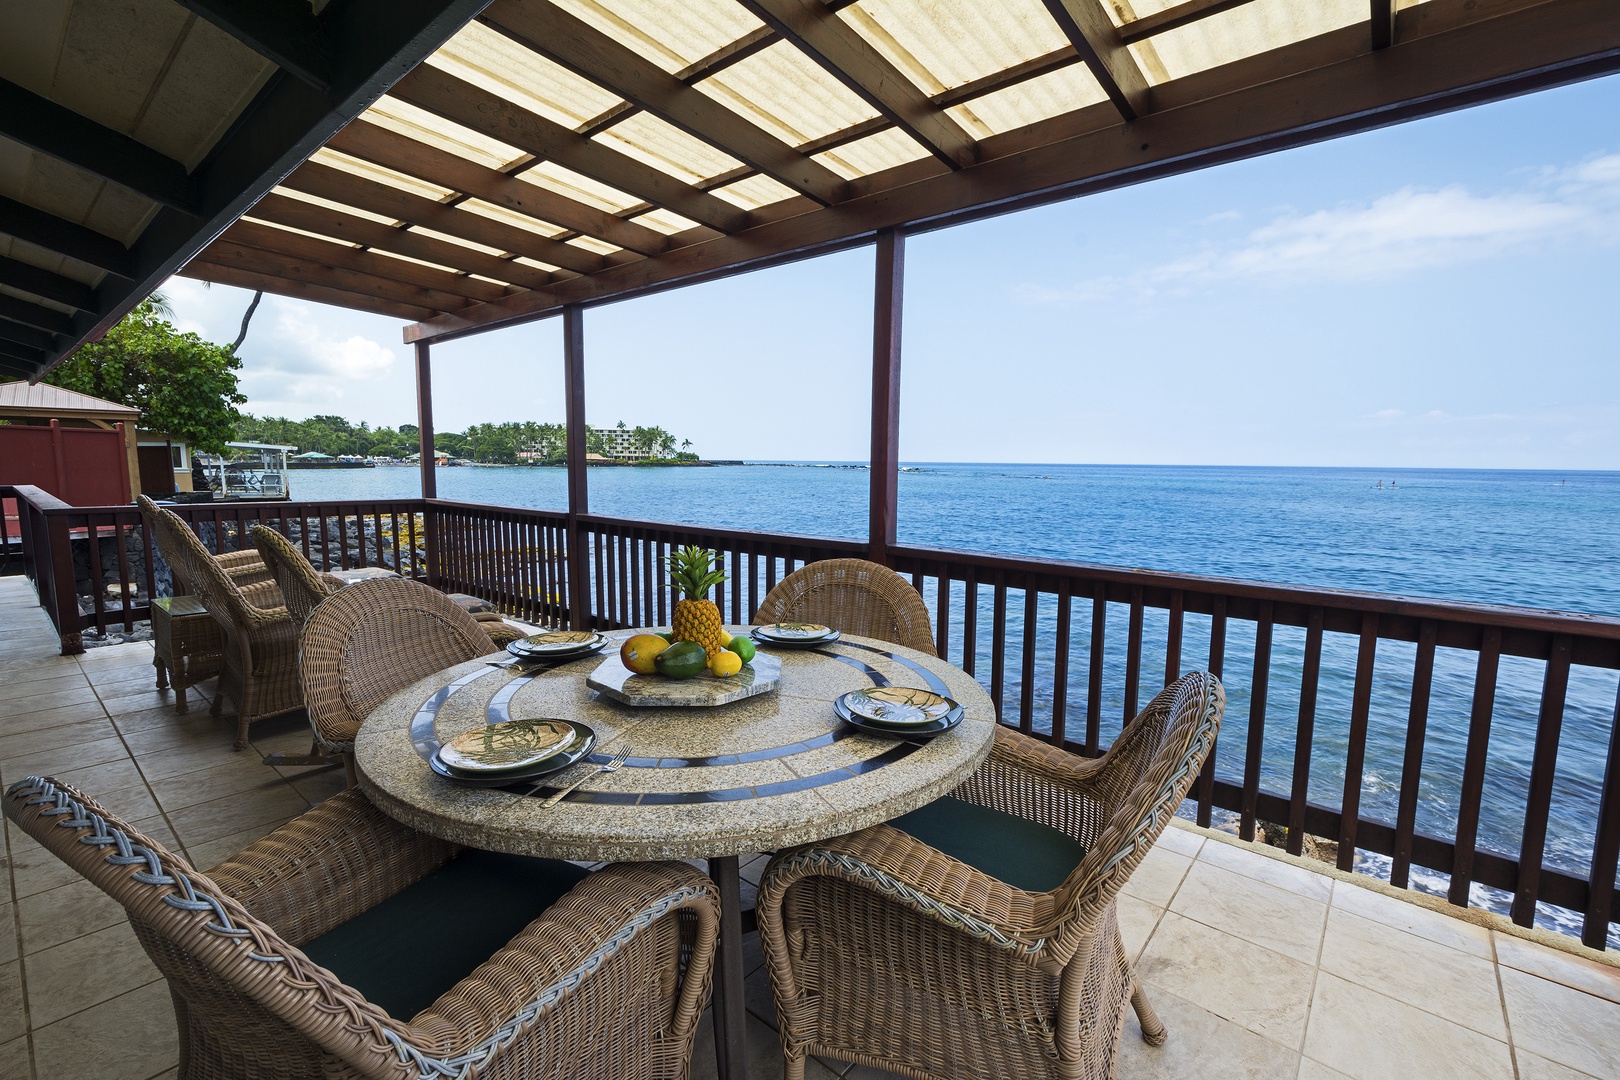 Kailua Kona Vacation Rentals, The Cottage - Outdoor dining on the waters edge!